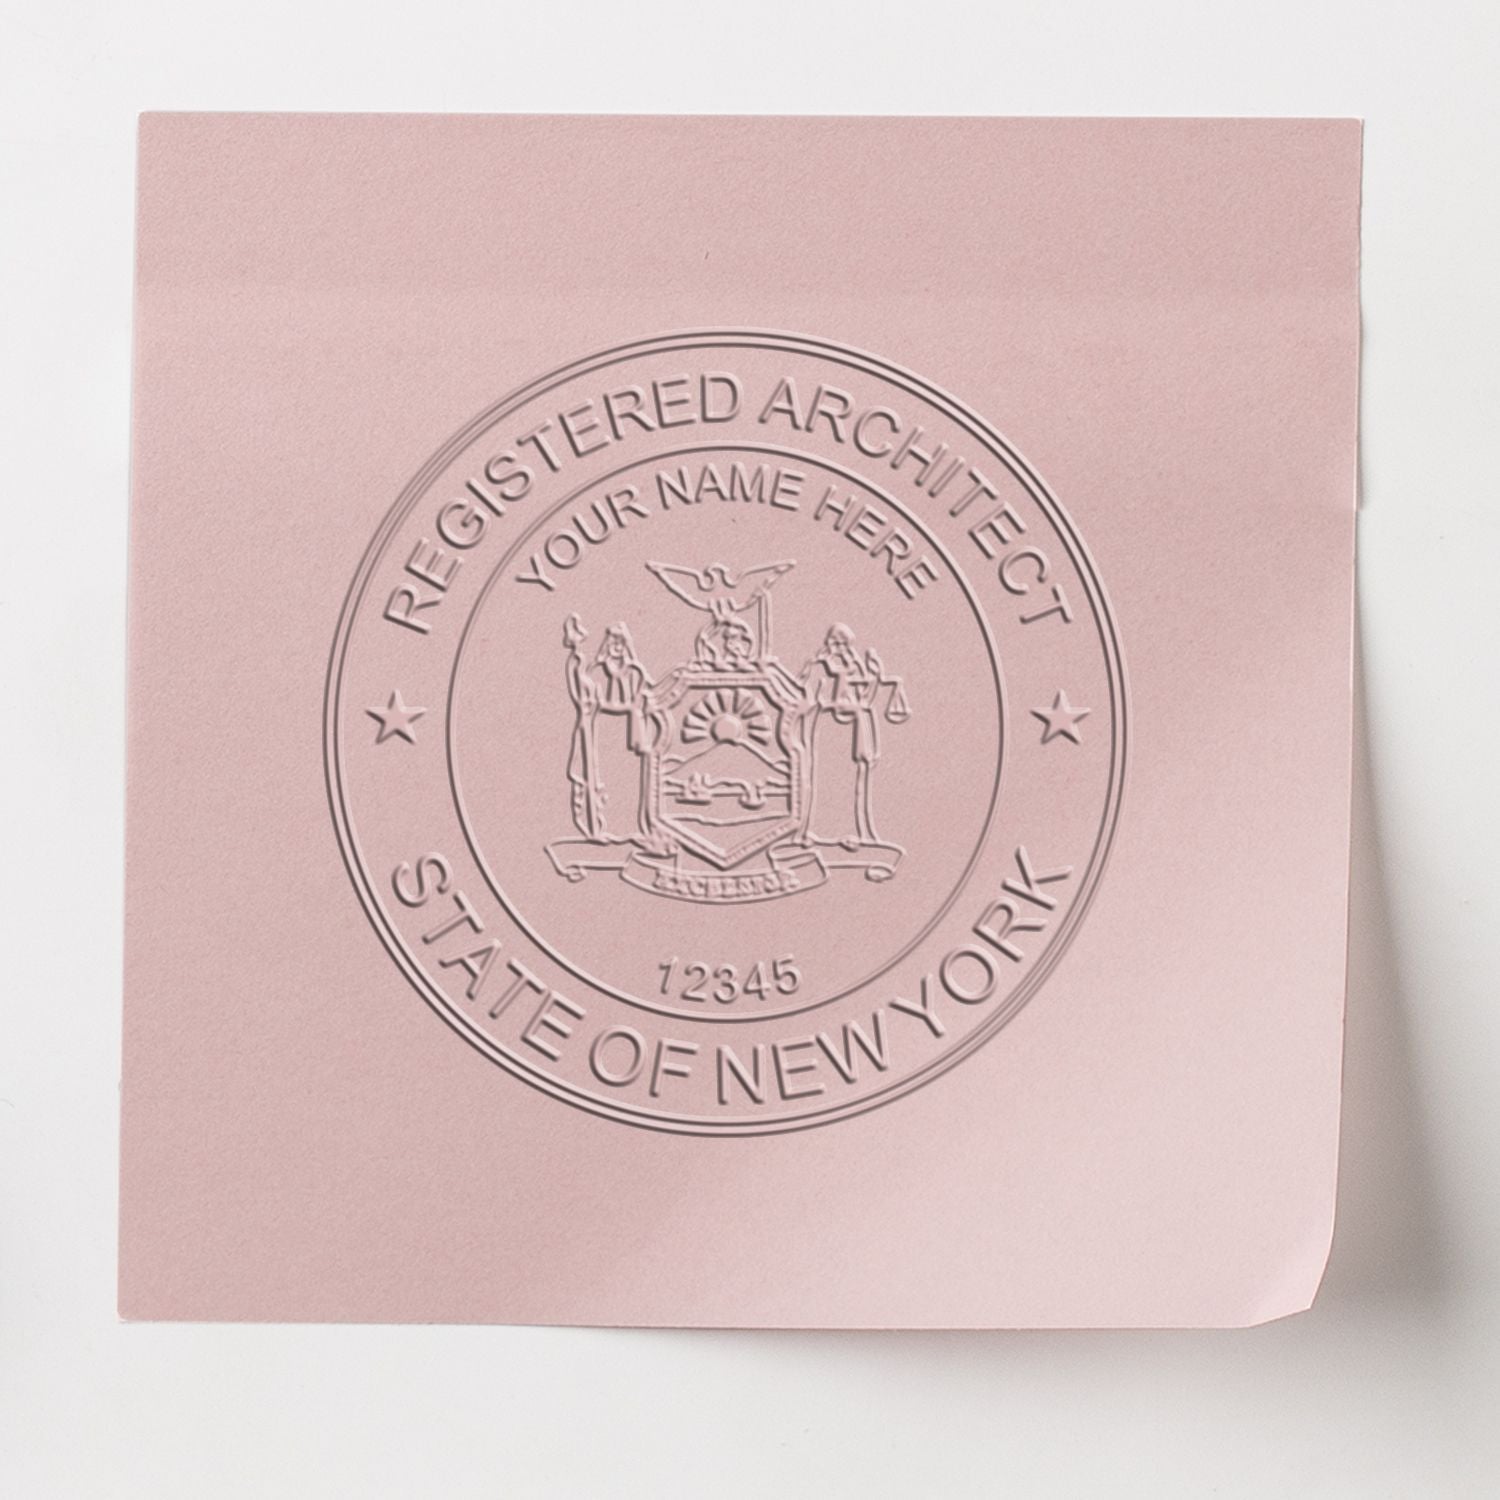 This paper is stamped with a sample imprint of the Handheld New York Architect Seal Embosser, signifying its quality and reliability.